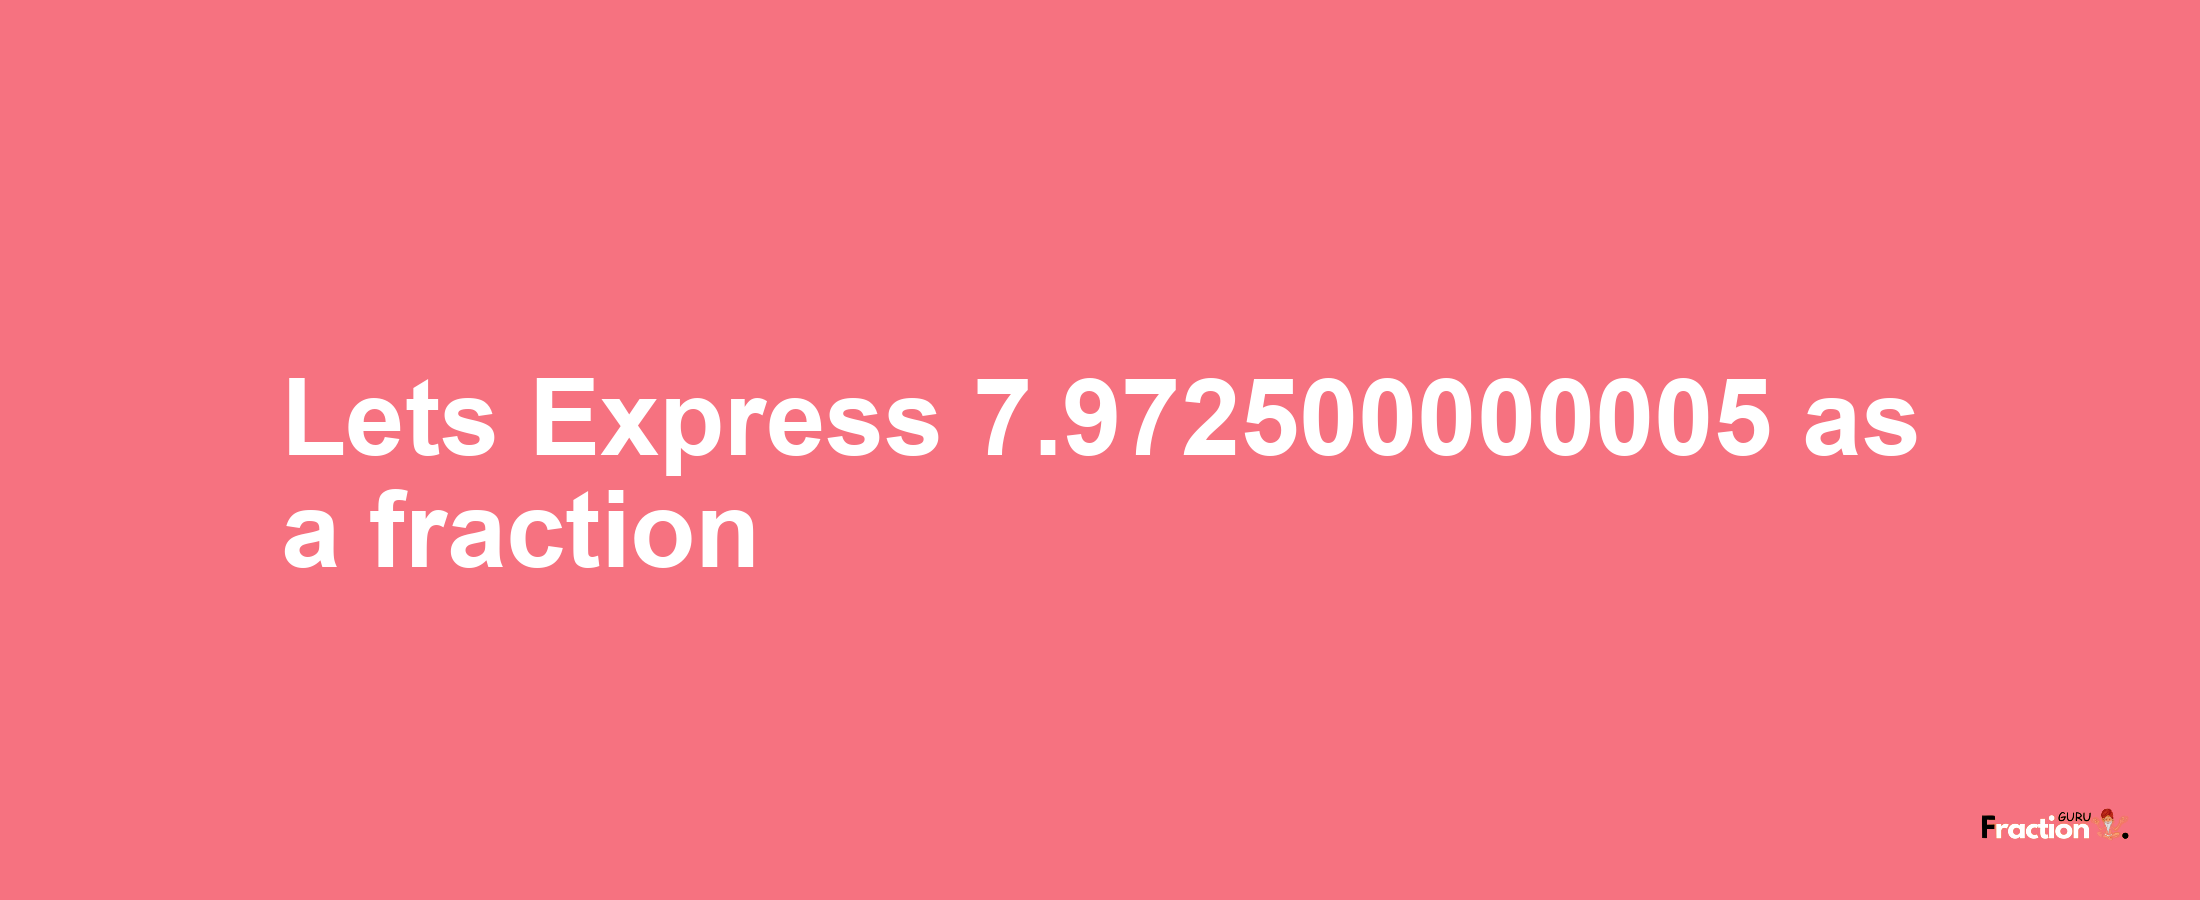 Lets Express 7.972500000005 as afraction